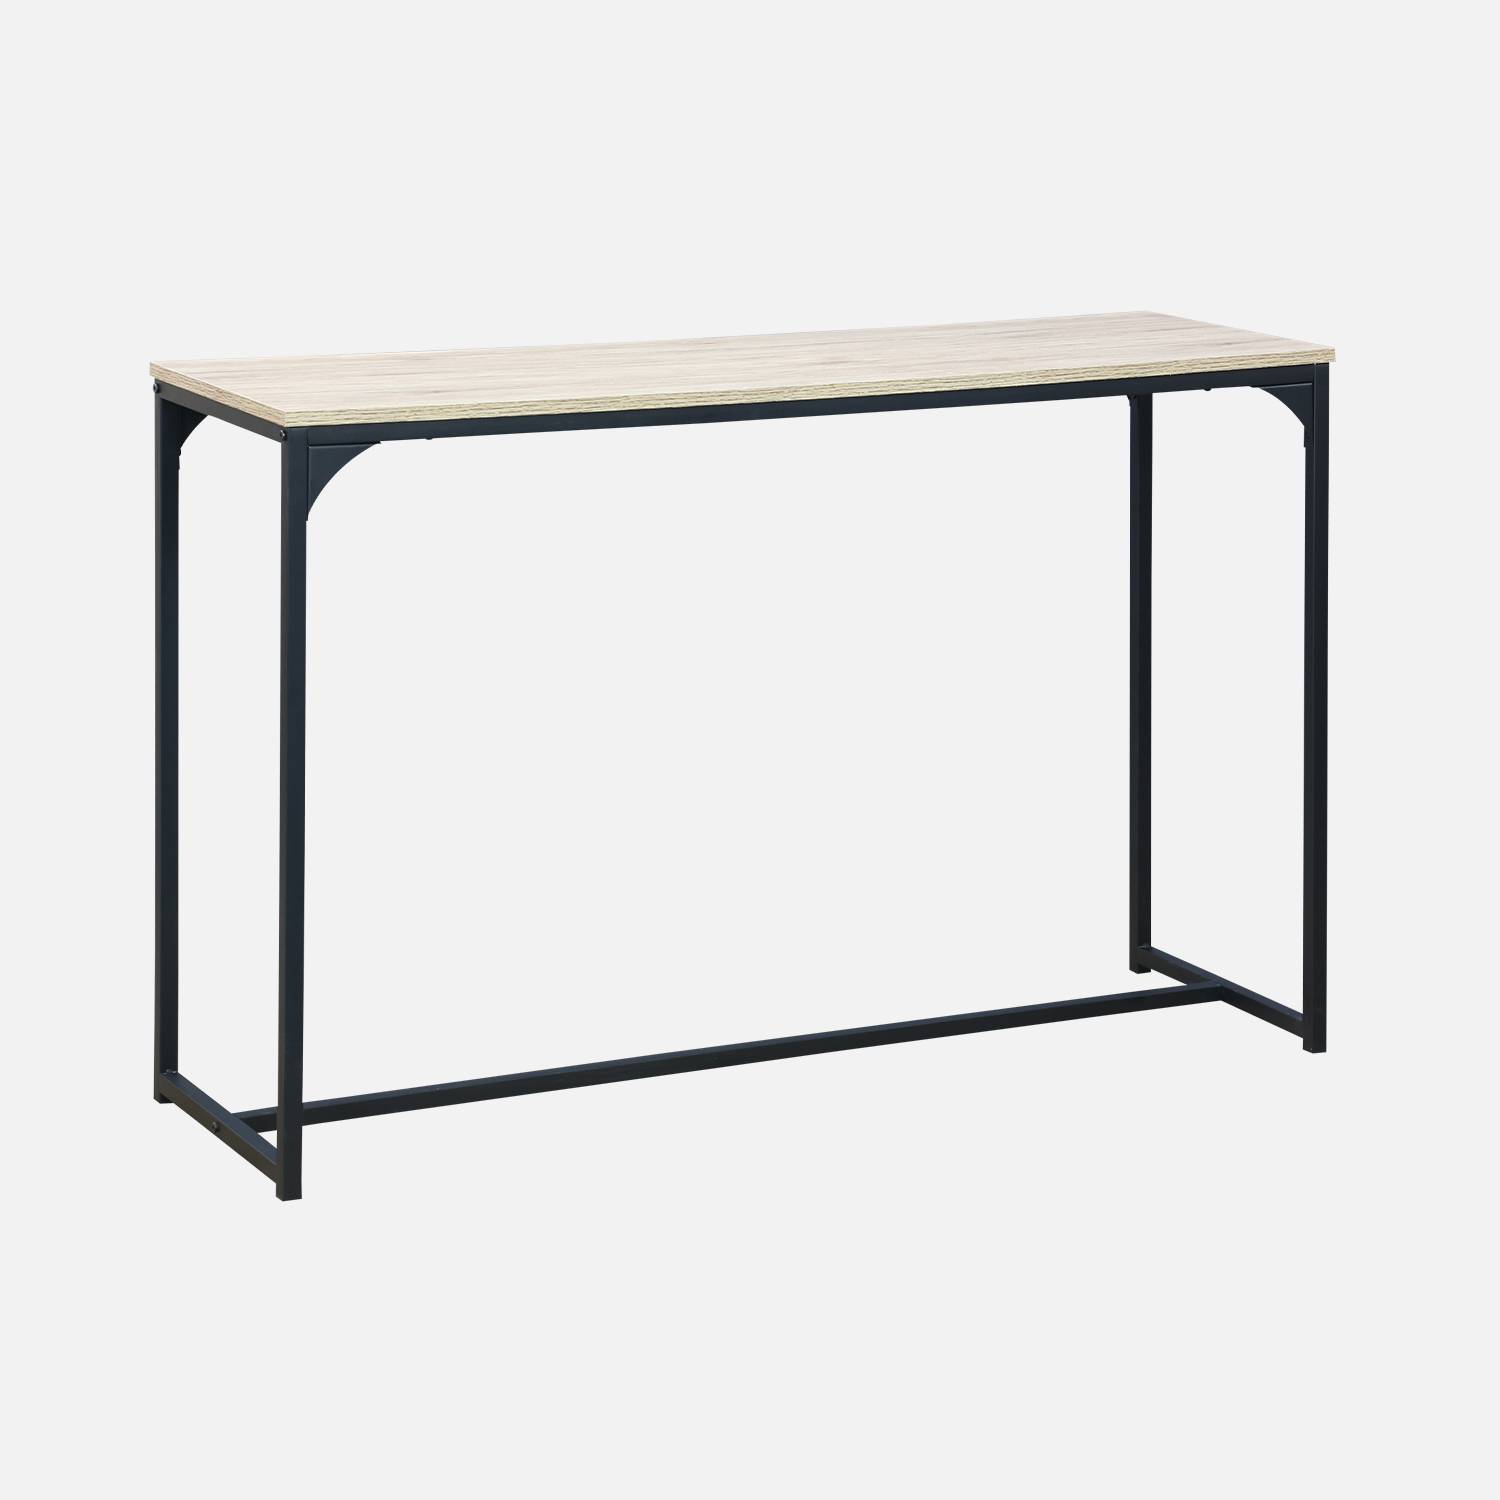 Metal and wood-style hallway console table with industrial metal legs 120cm - Loft - Black,sweeek,Photo3